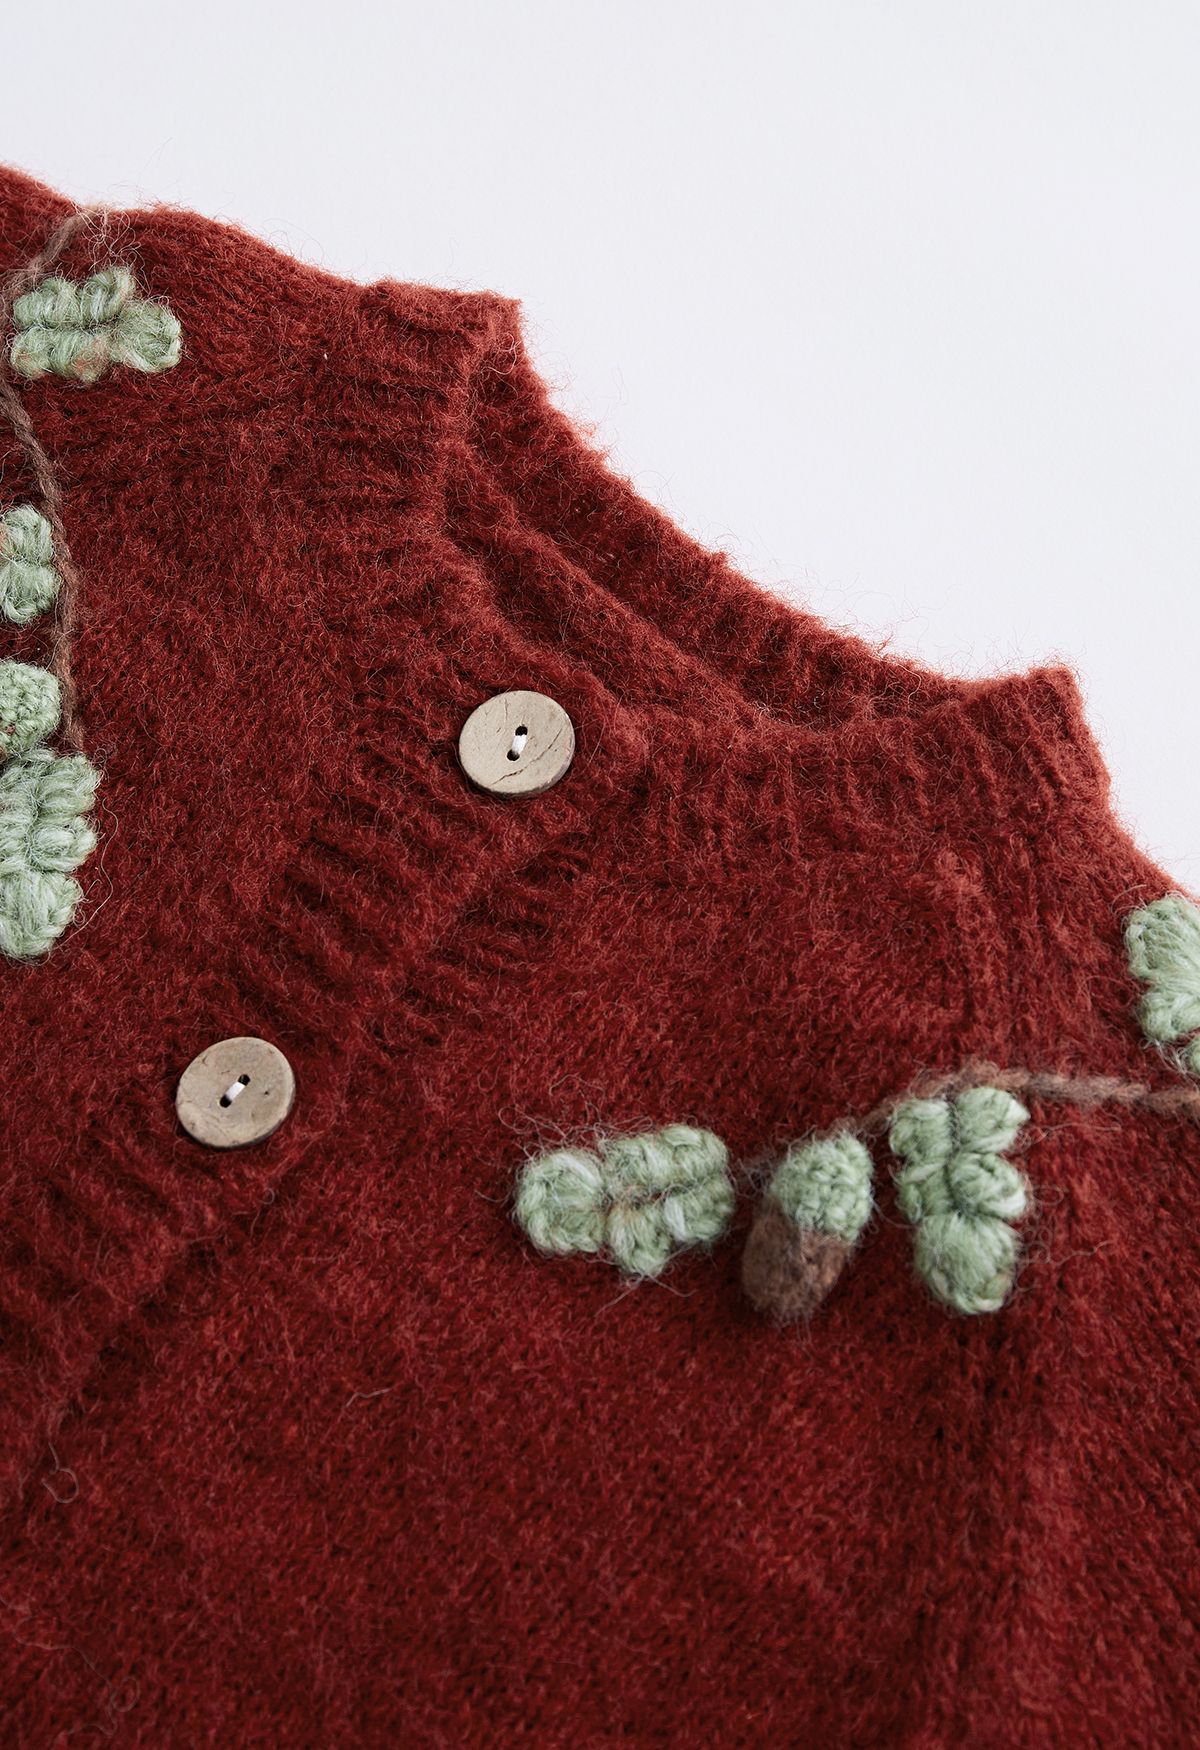 Wooden Button Fuzzy Knit Cardigan For Kids